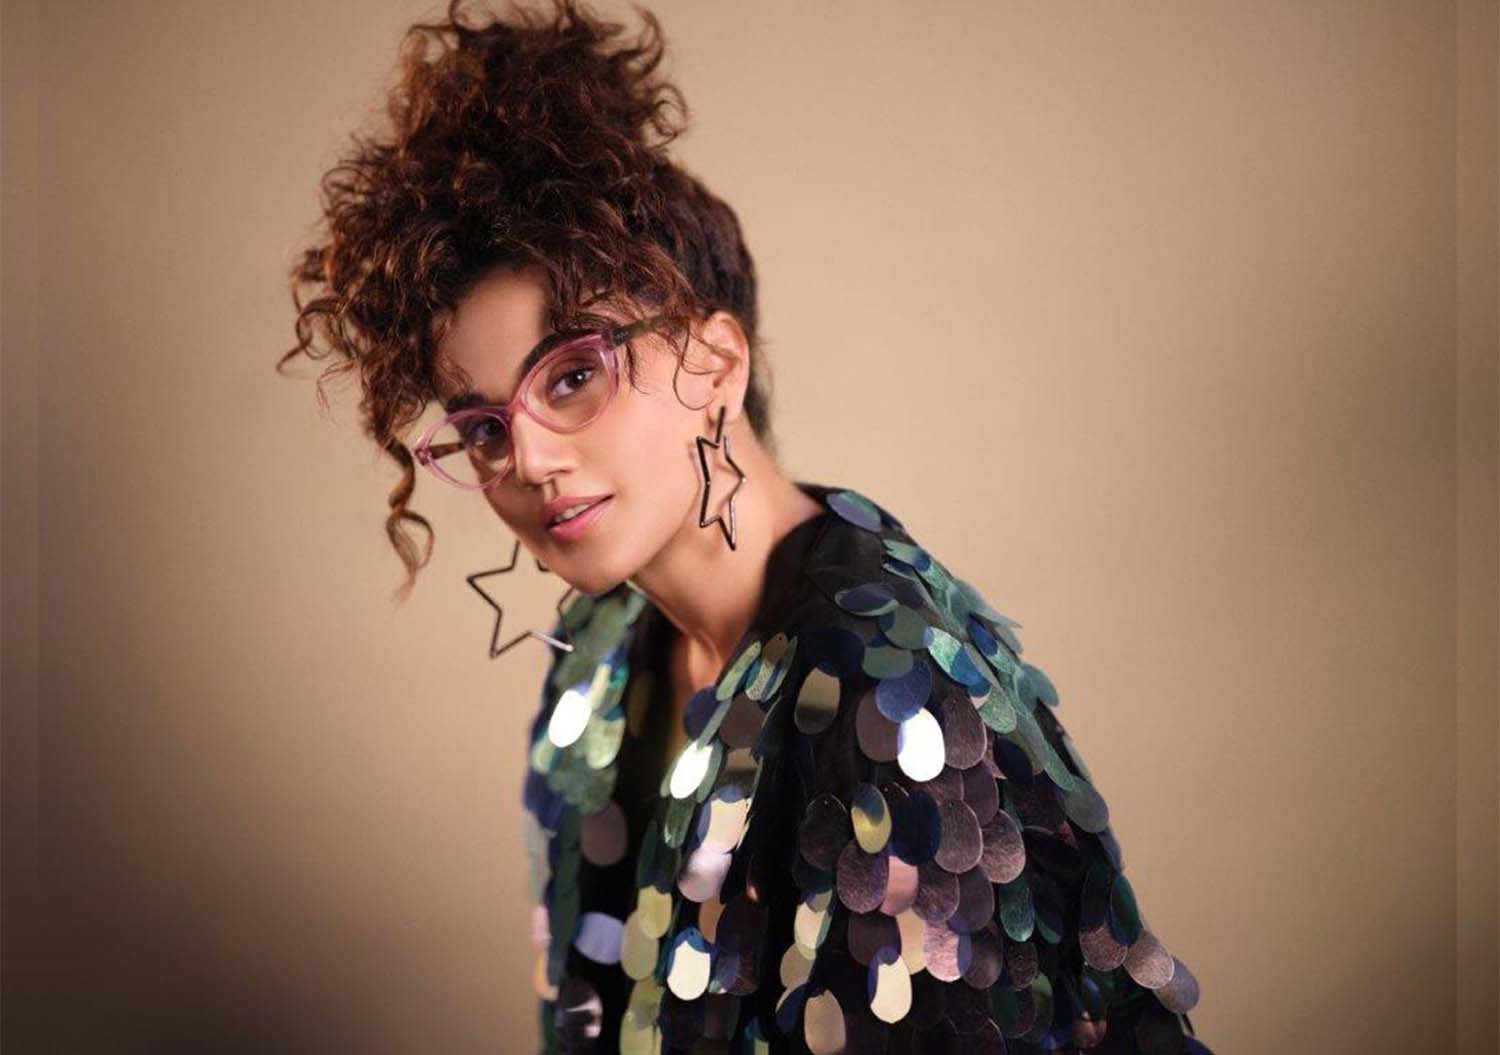 VOGUE EYEWEAR ANNOUNCES TAAPSEE PANNU AS THE FACE OF THE BRAND IN